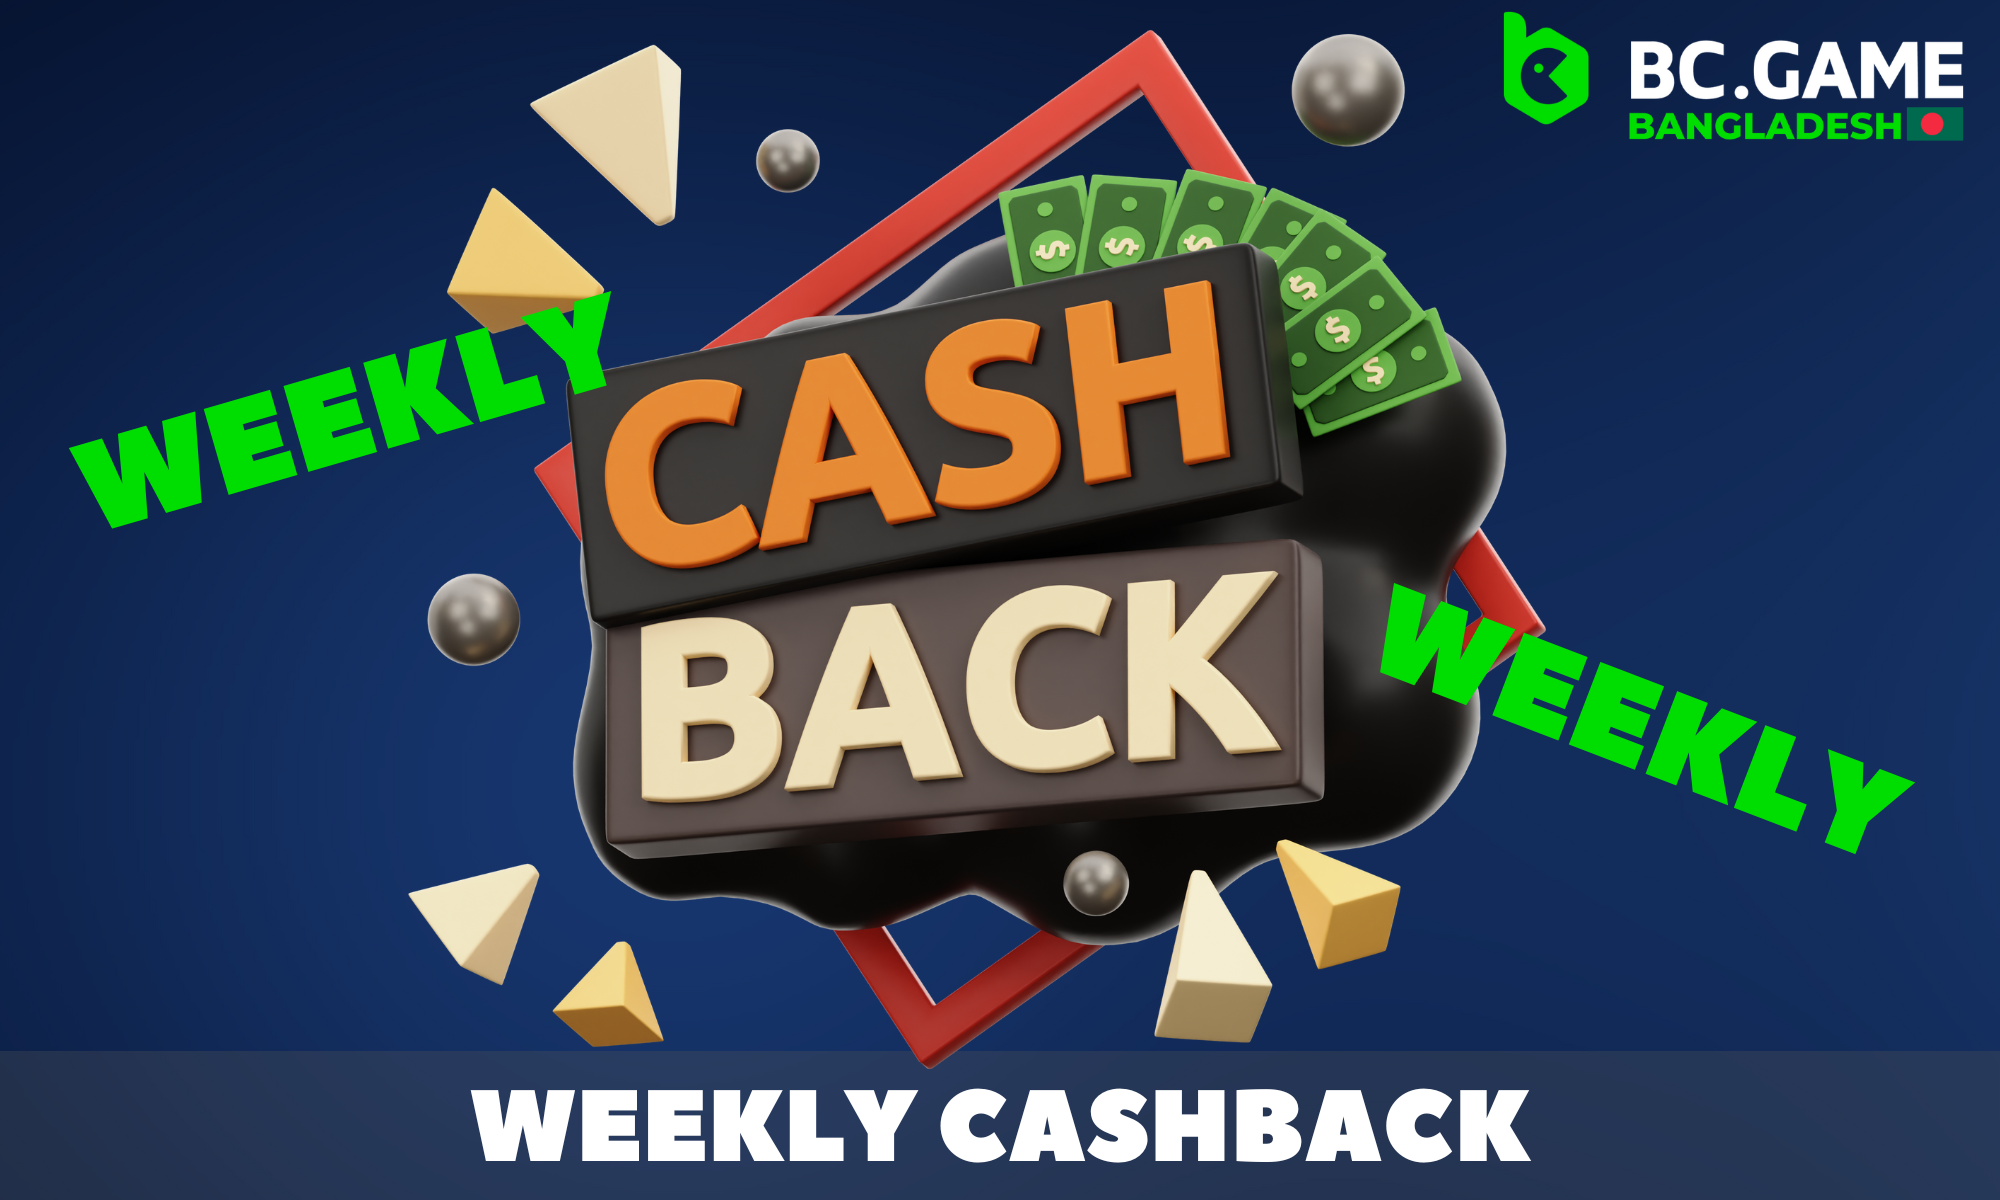 After reaching level 22, BC Game players from Bangladesh can receive a weekly cashback of 1% to 5%